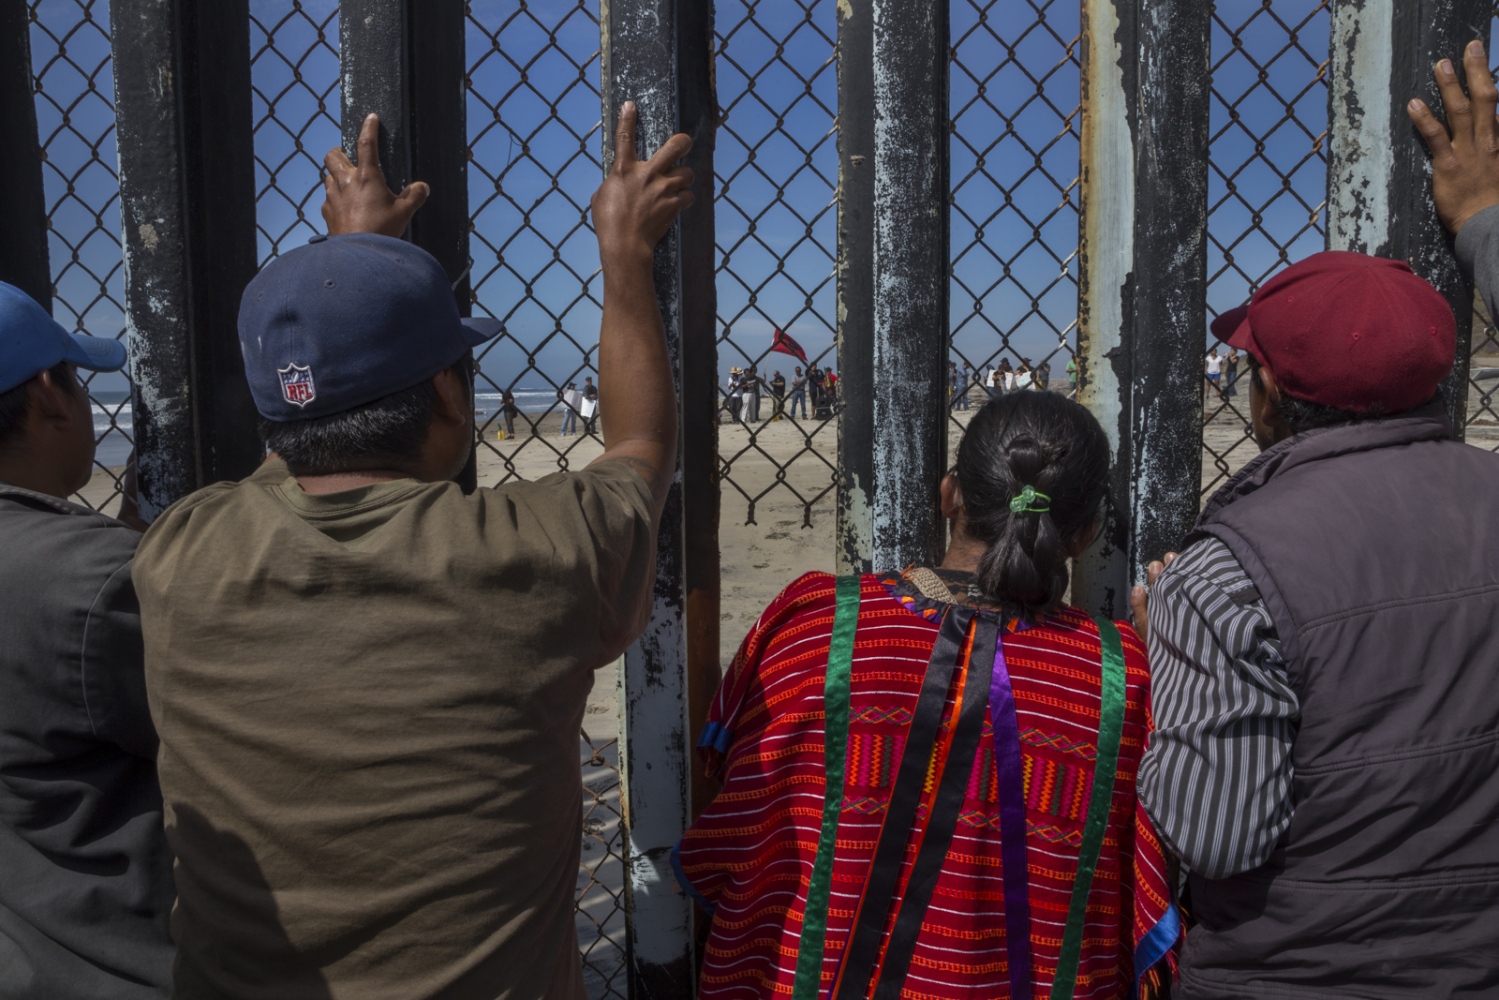 Farmworkers from Mexico&rsquo;s San Quintin valley gather&nbsp;at the border fence to...